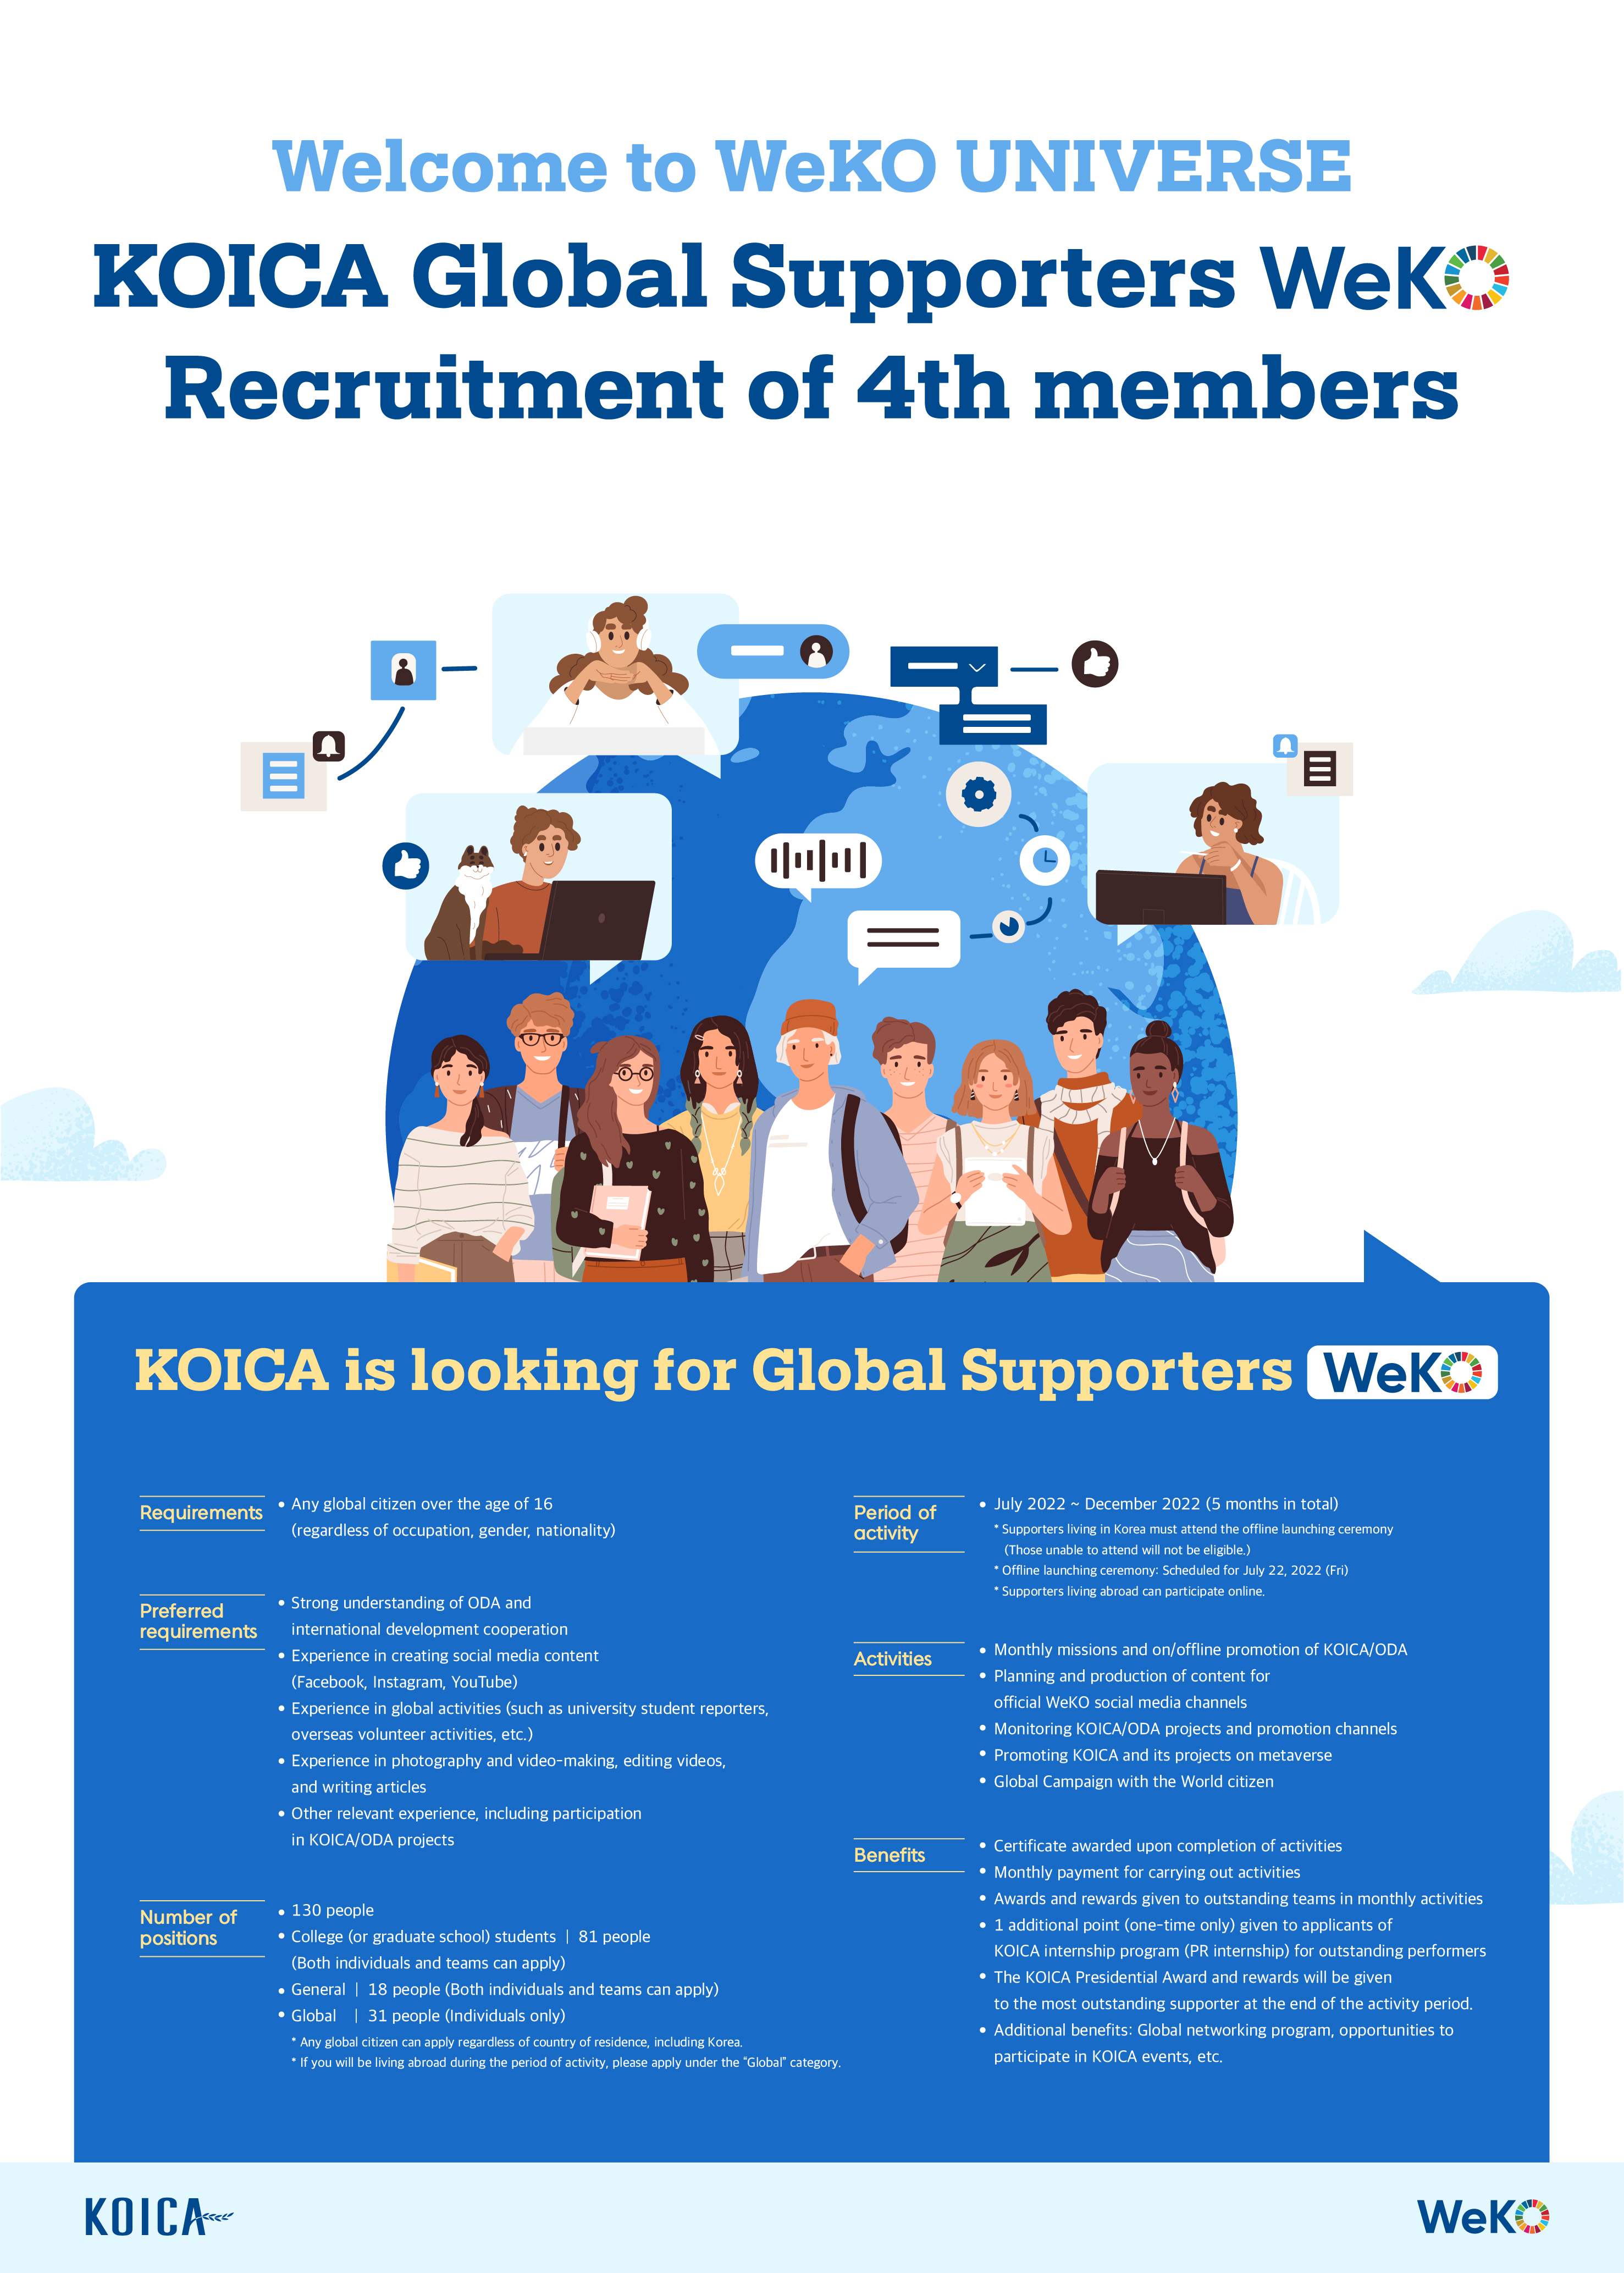  Welcome to WeKO UNIVERSE KOICA Global Supporters Weko Recruitment of 4th members 00 KOICA is looking for Global Supporters WeKo Requirements • Any global citizen over the age of 16 (regardless of occupation, gender, nationality) Period of activity • July 2022 ~ December 2022 (5 months in total) * Supporters living in Korea must attend the offline launching ceremony (Those unable to attend will not be eligible.) * Offline launching ceremony: Scheduled for July 22, 2022 (Fri) * Supporters living abroad can participate online. Preferred requirements Activities • Strong understanding of ODA and international development cooperation • Experience in creating social media content (Facebook, Instagram, YouTube) • Experience in global activities (such as university student reporters, overseas volunteer activities, etc.) • Experience in photography and video-making, editing videos, and writing articles • Other relevant experience, including participation in KOICA/ODA projects • Monthly missions and on/offline promotion of KOICA/ODA • Planning and production of content for official WeKo social media channels • Monitoring KOICA/ODA projects and promotion channels • Promoting KOICA and its projects on metaverse • Global Campaign with the World citizen Benefits Number of positions • 130 people • College (or graduate school) students | 81 people (Both individuals and teams can apply) • General | 18 people (Both individuals and teams can apply) • Global | 31 people (Individuals only) • Certificate awarded upon completion of activities • Monthly payment for carrying out activities • Awards and rewards given to outstanding teams in monthly activities • 1 additional point (one-time only) given to applicants of KOICA internship program (PR internship) for outstanding performers • The KOICA Presidential Award and rewards will be given to the most outstanding supporter at the end of the activity period. • Additional benefits: Global networking program, opportunities to participate in KOICA events, etc. * Any global citizen can apply regardless of country of residence, including Korea. * If you will be living abroad during the period of activity, please apply under the "Global" category. KOICAce Weko